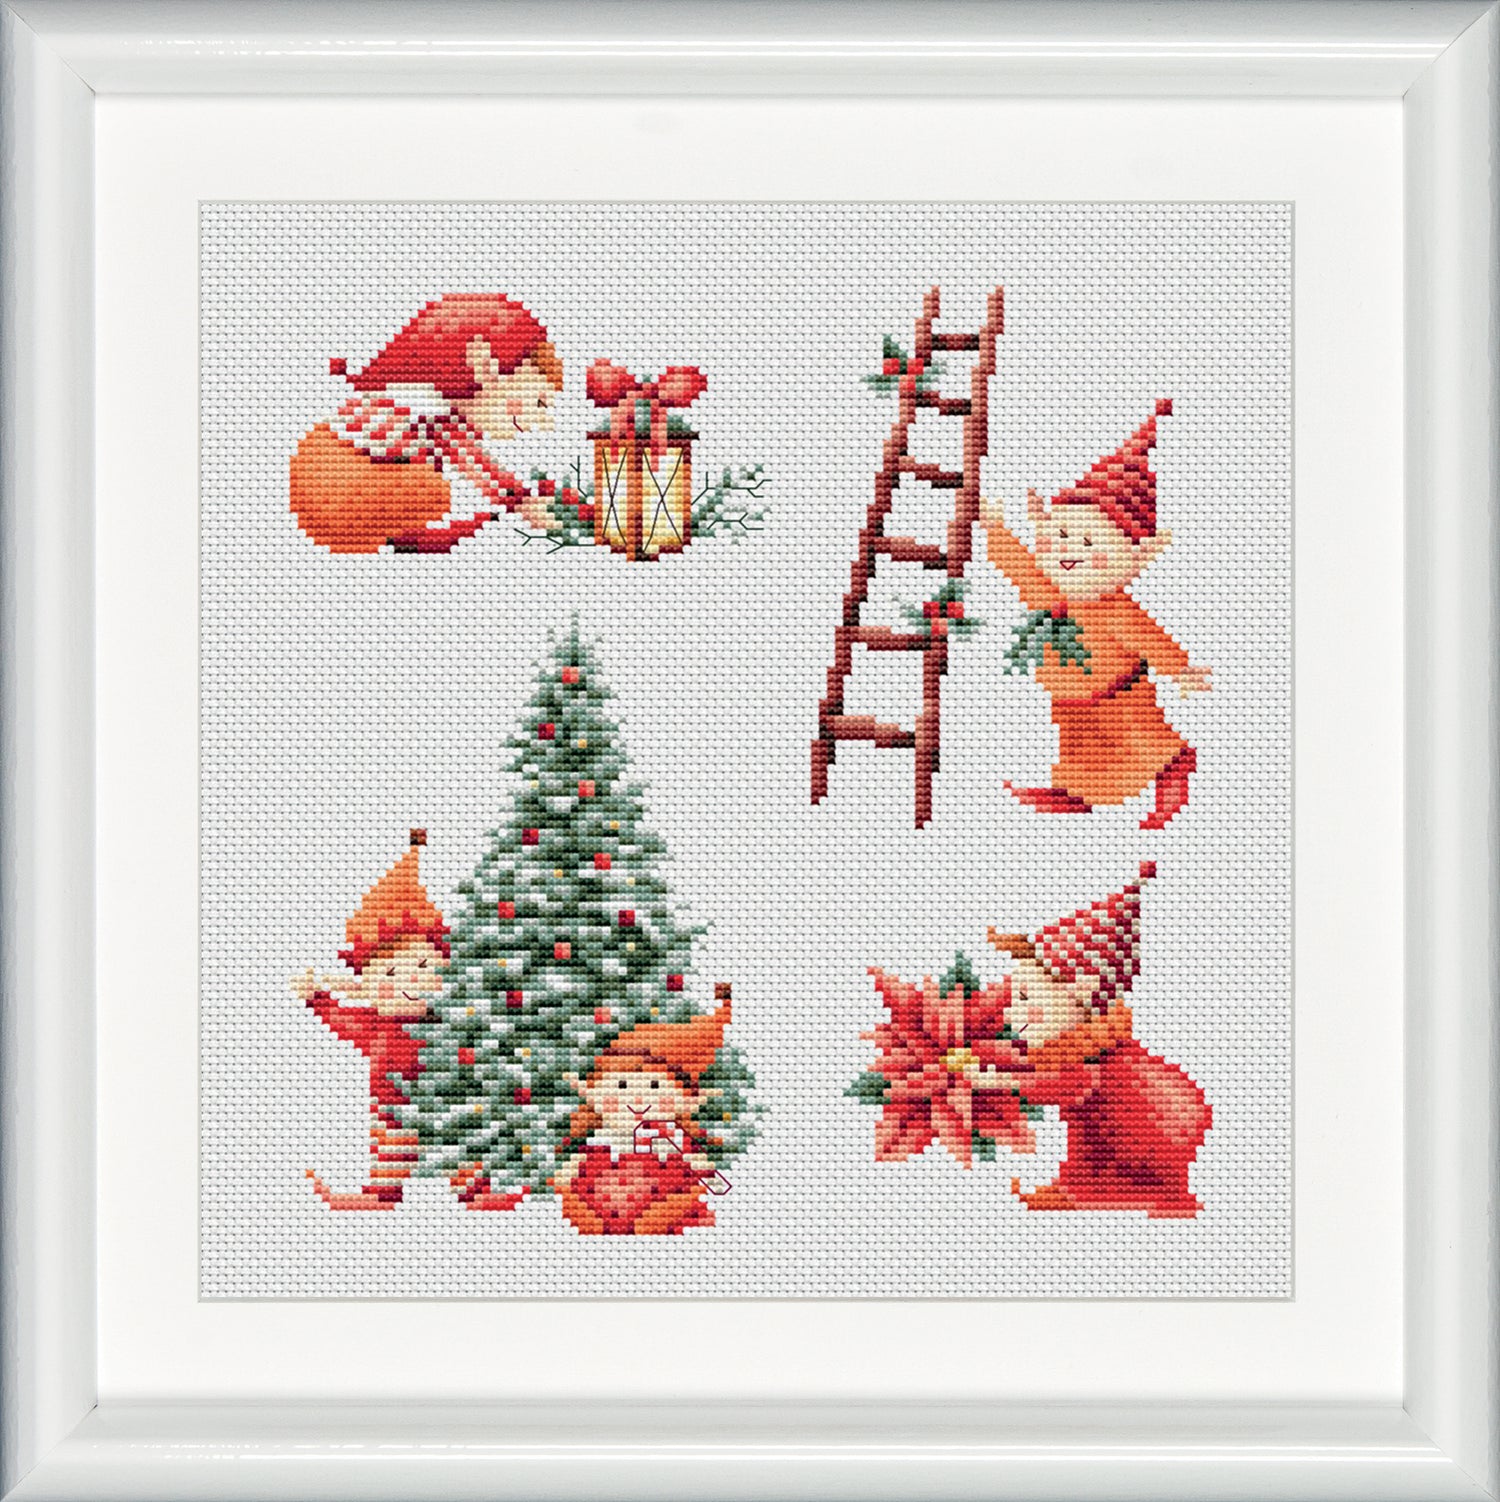 Three lovely embroidery designs of Christmase elves. This first design shows five elves busy with Christmas decorations. The color palette in warm tones highlighted with Christmas red! DSB cross stitch kits have easy to follow design charts and contain all items needed to facilitate embroidery without hassle. To cater to both beginners as well as advanced stitching artists. 